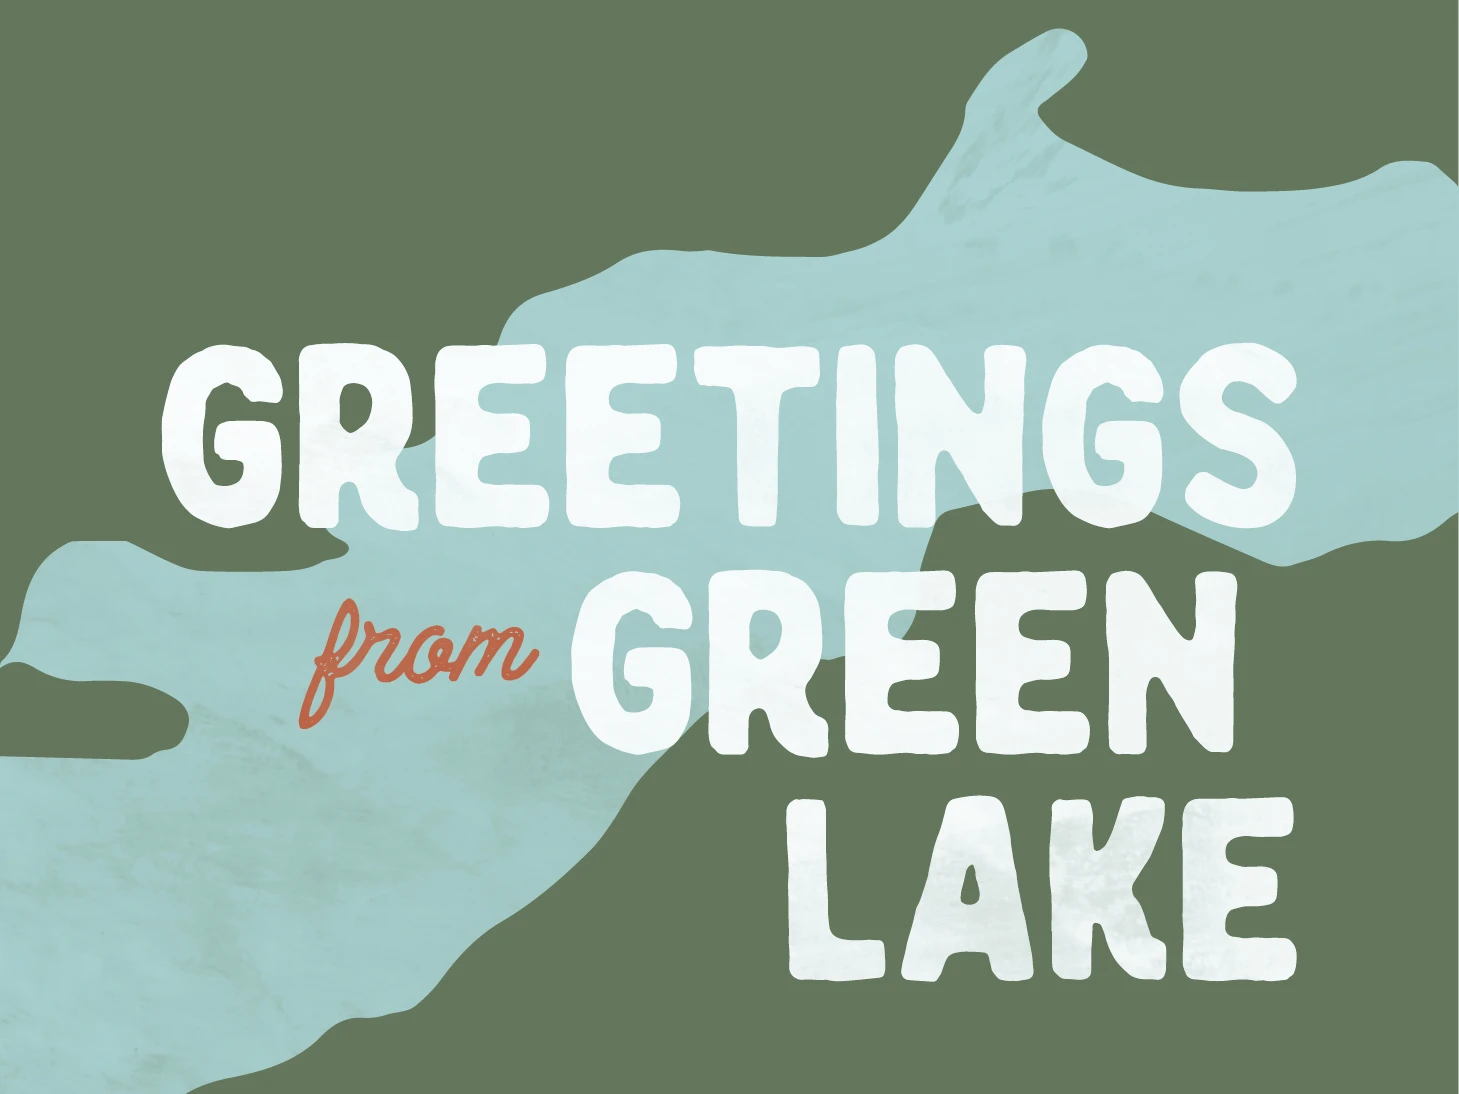 Greetings from Green Lake, Wisconsin Image